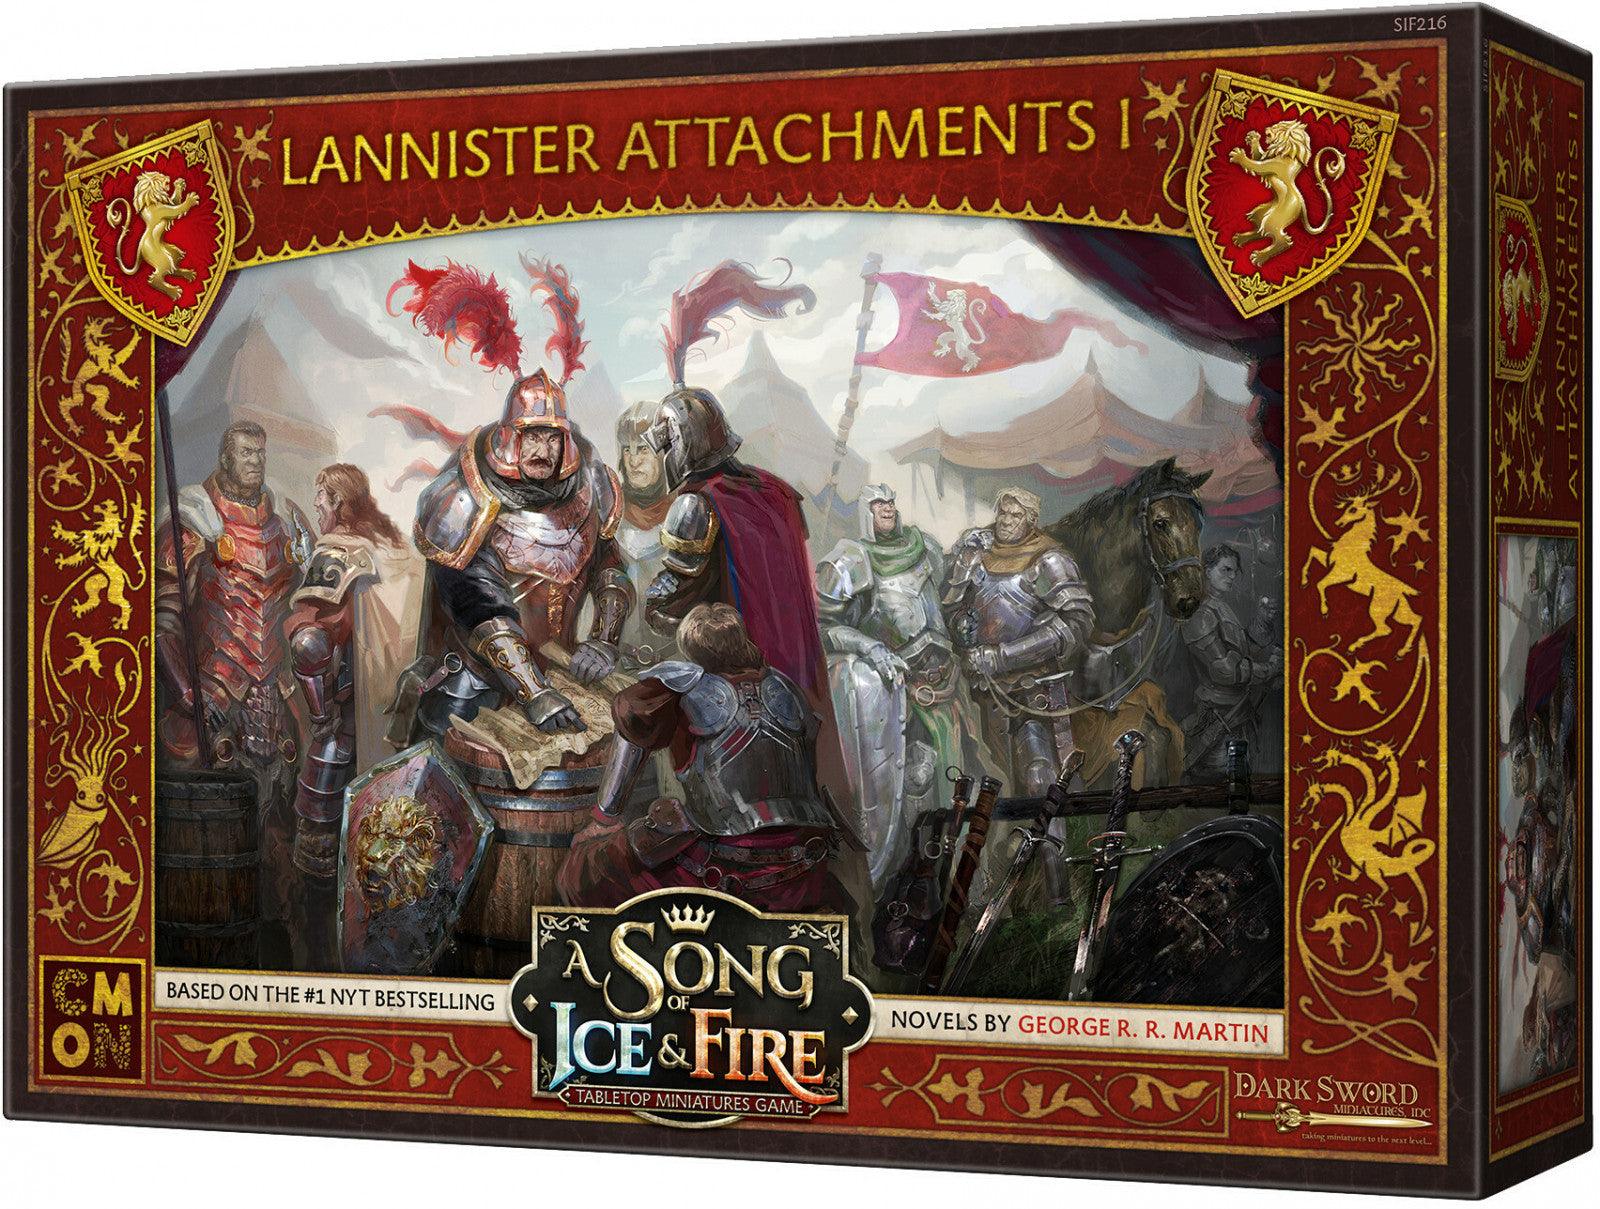 VR-86326 A Song of Ice and Fire TMG - Lannister Attachments 1 - CMON - Titan Pop Culture